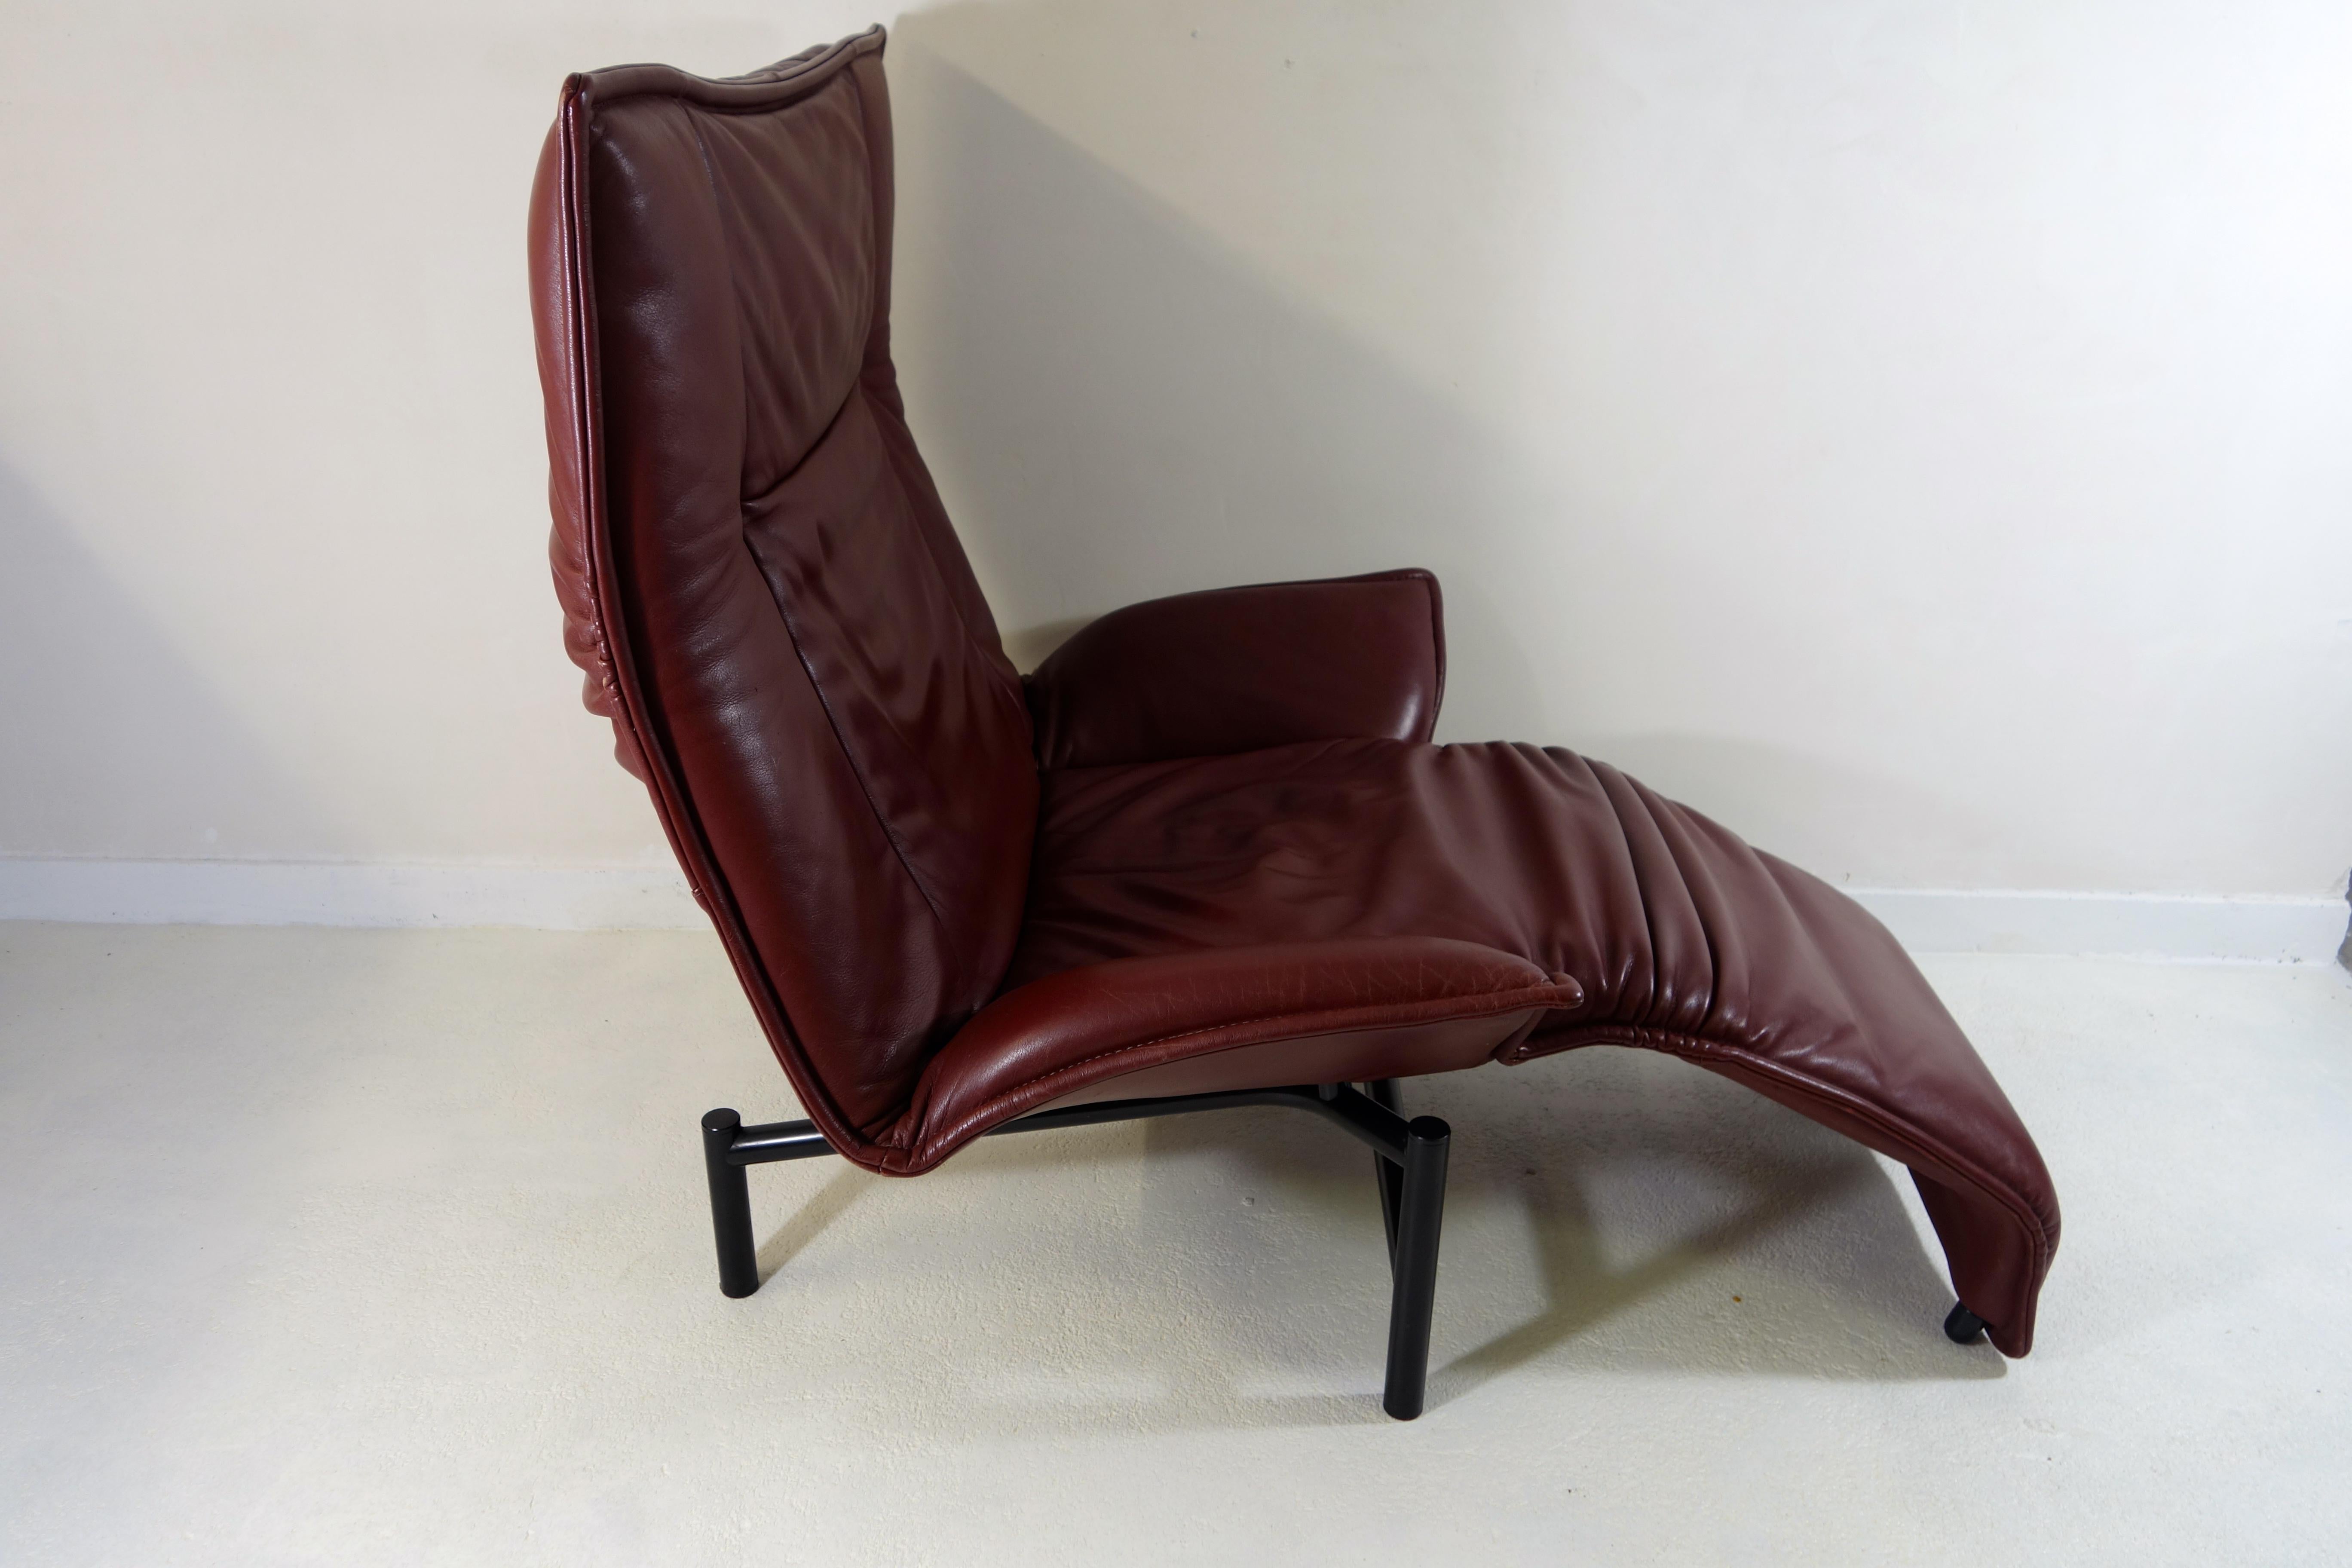 Post-Modern Veranda Lounge Chair by Vico Magistretti for Cassina in Brown Leather Reclining